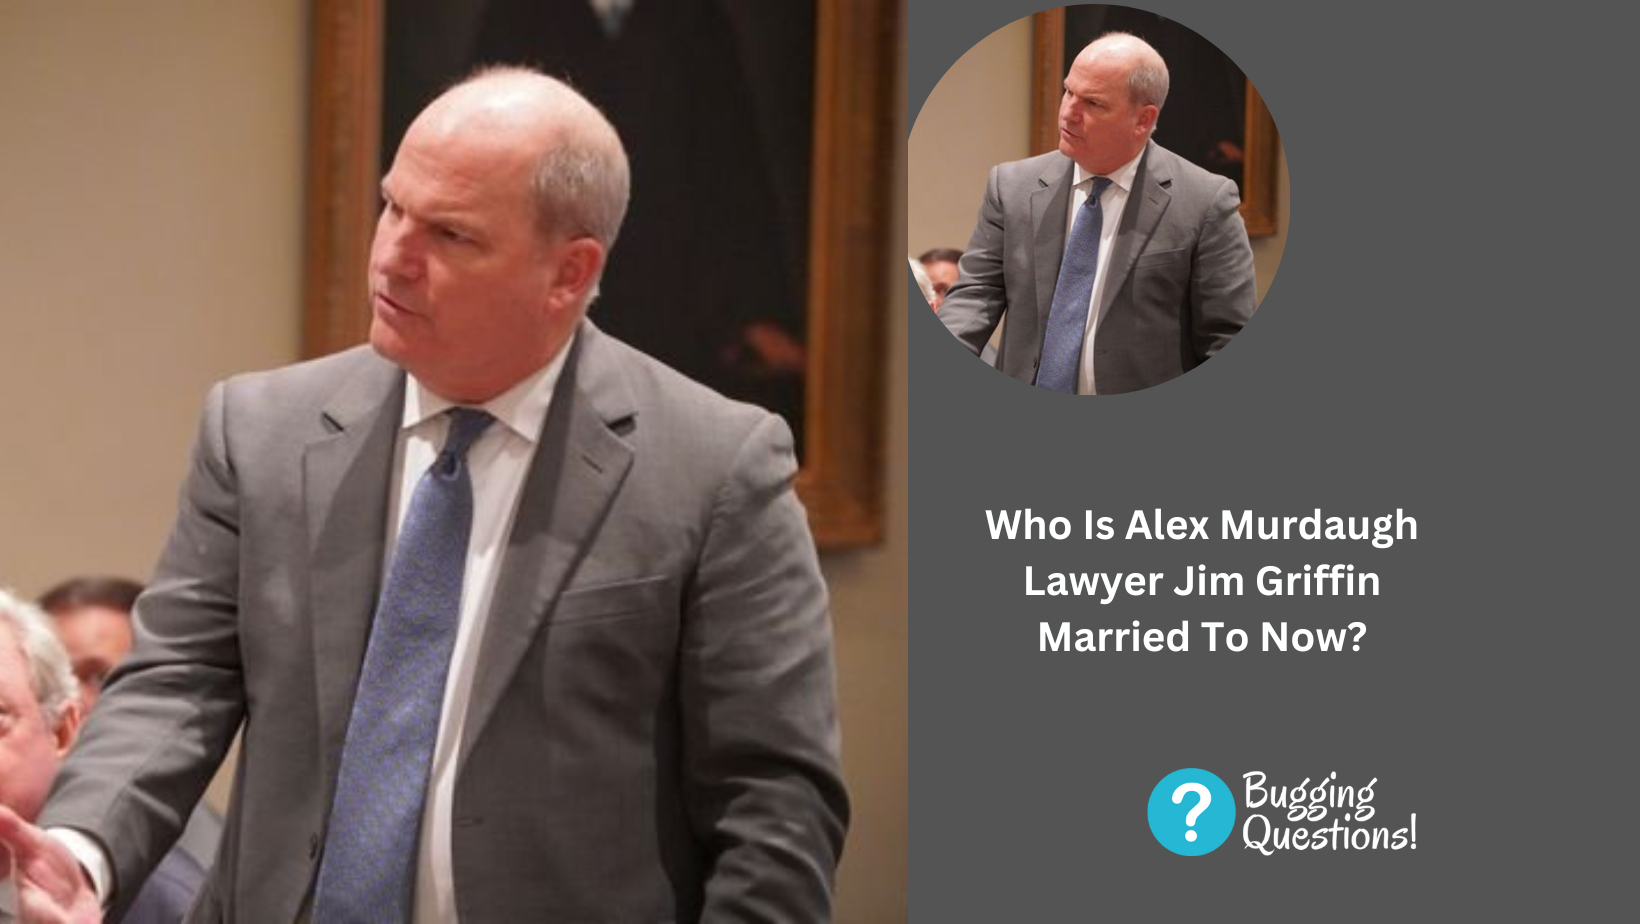 Who Is Alex Murdaugh Lawyer Jim Griffin Married To Now?